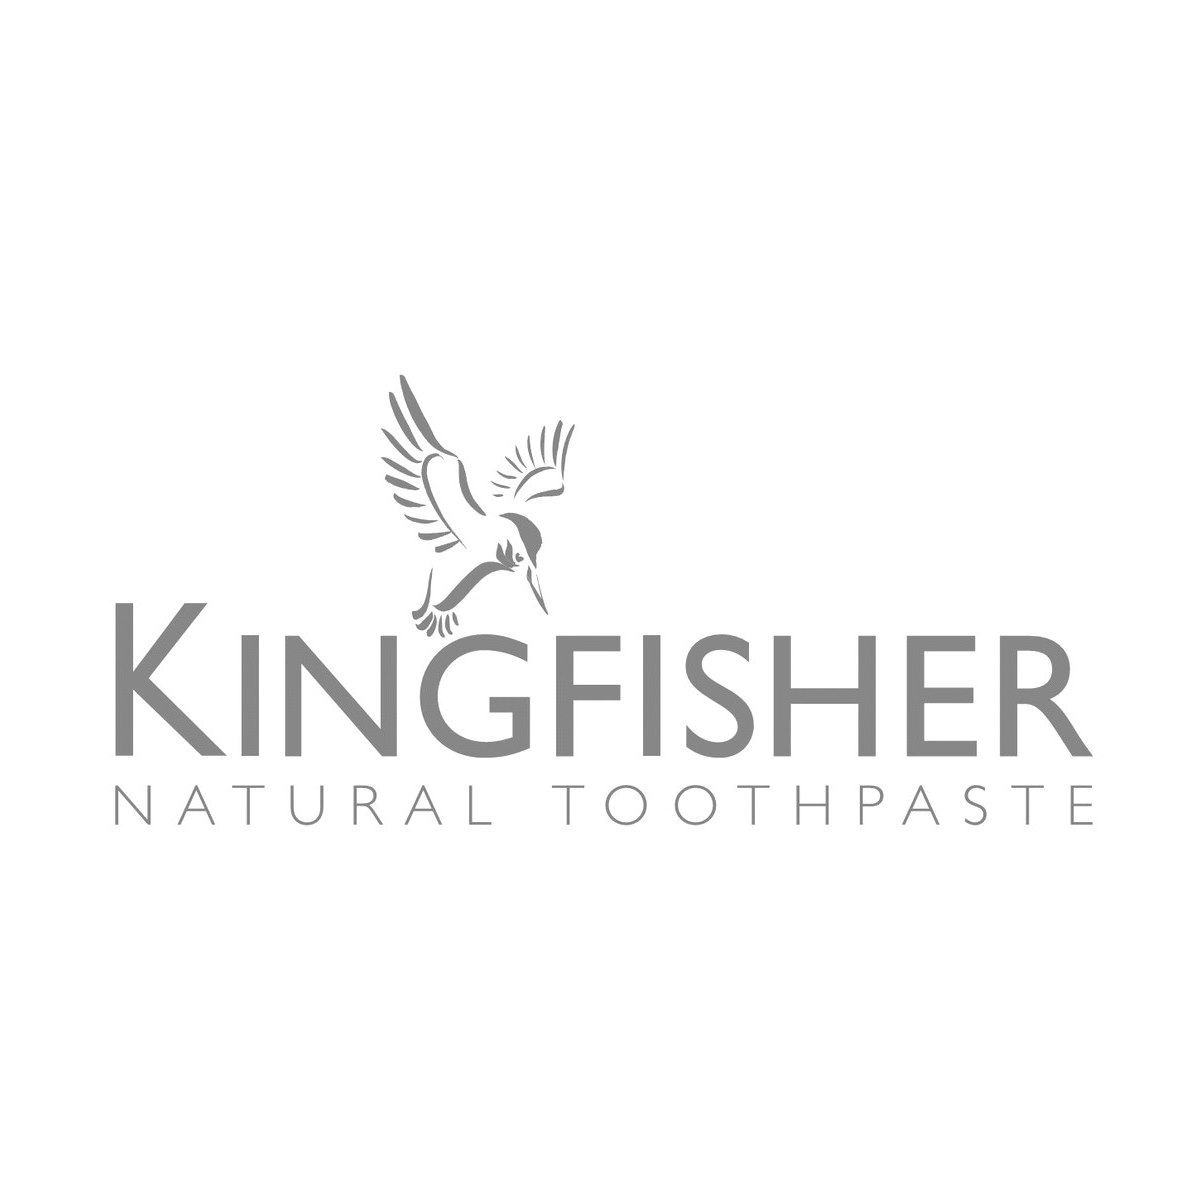 Where to Buy Kingfisher Natural Toothpaste